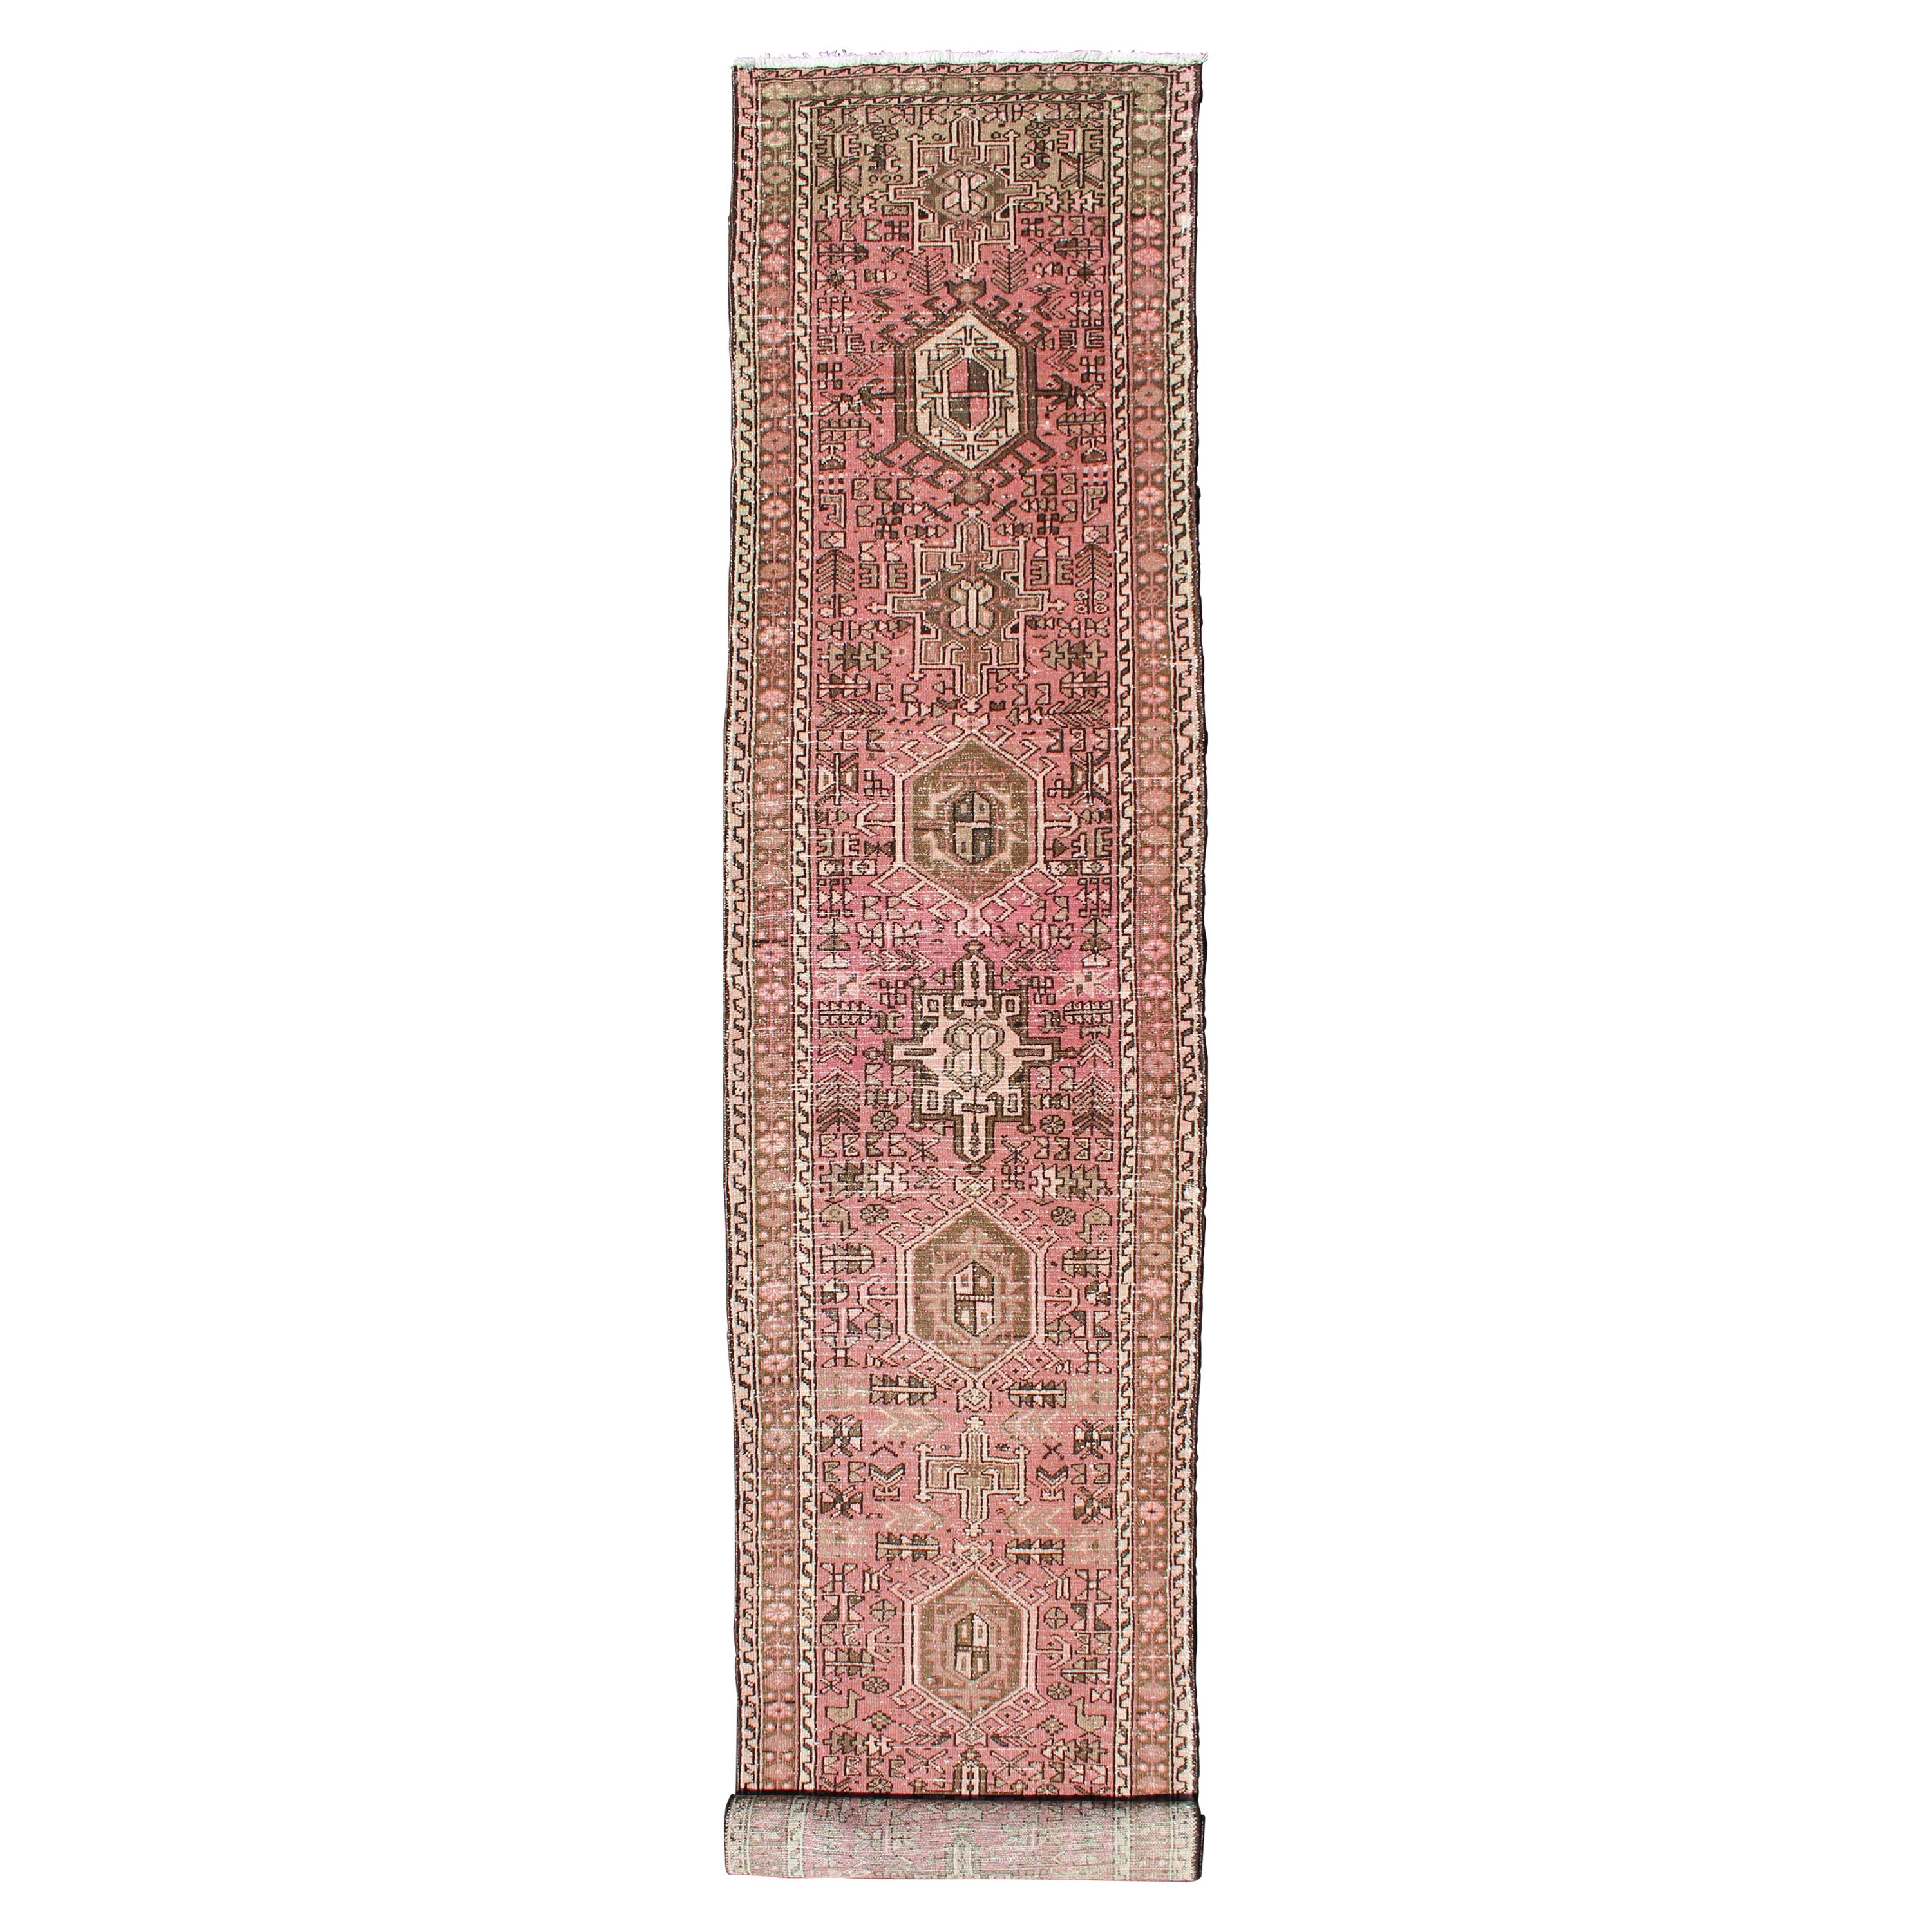 Long Narrow Persian Heriz Runner with Tribal Design in Pink and Taupe